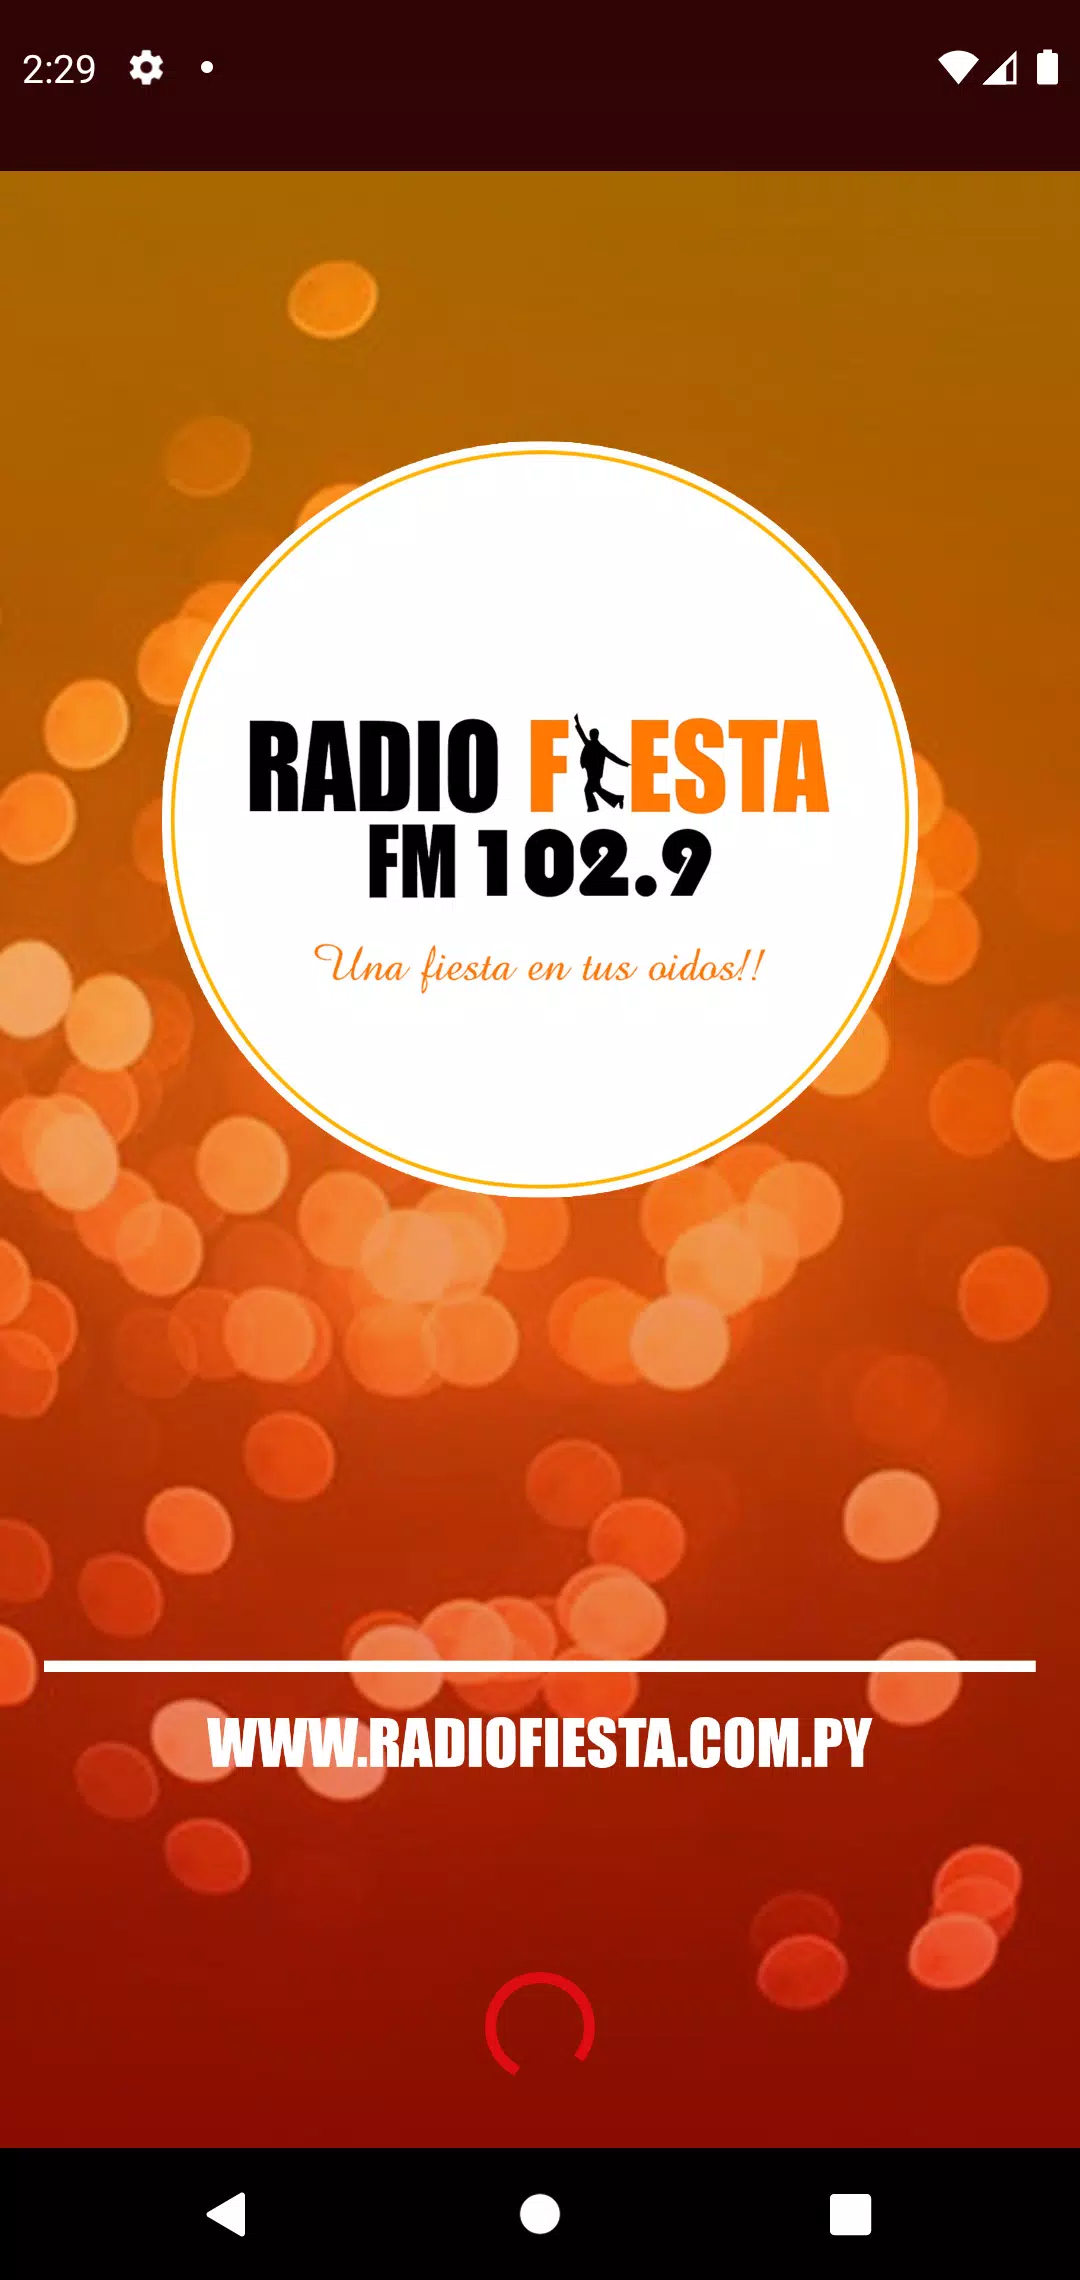 Radio Fiesta 102.9 FM for Android - APK Download